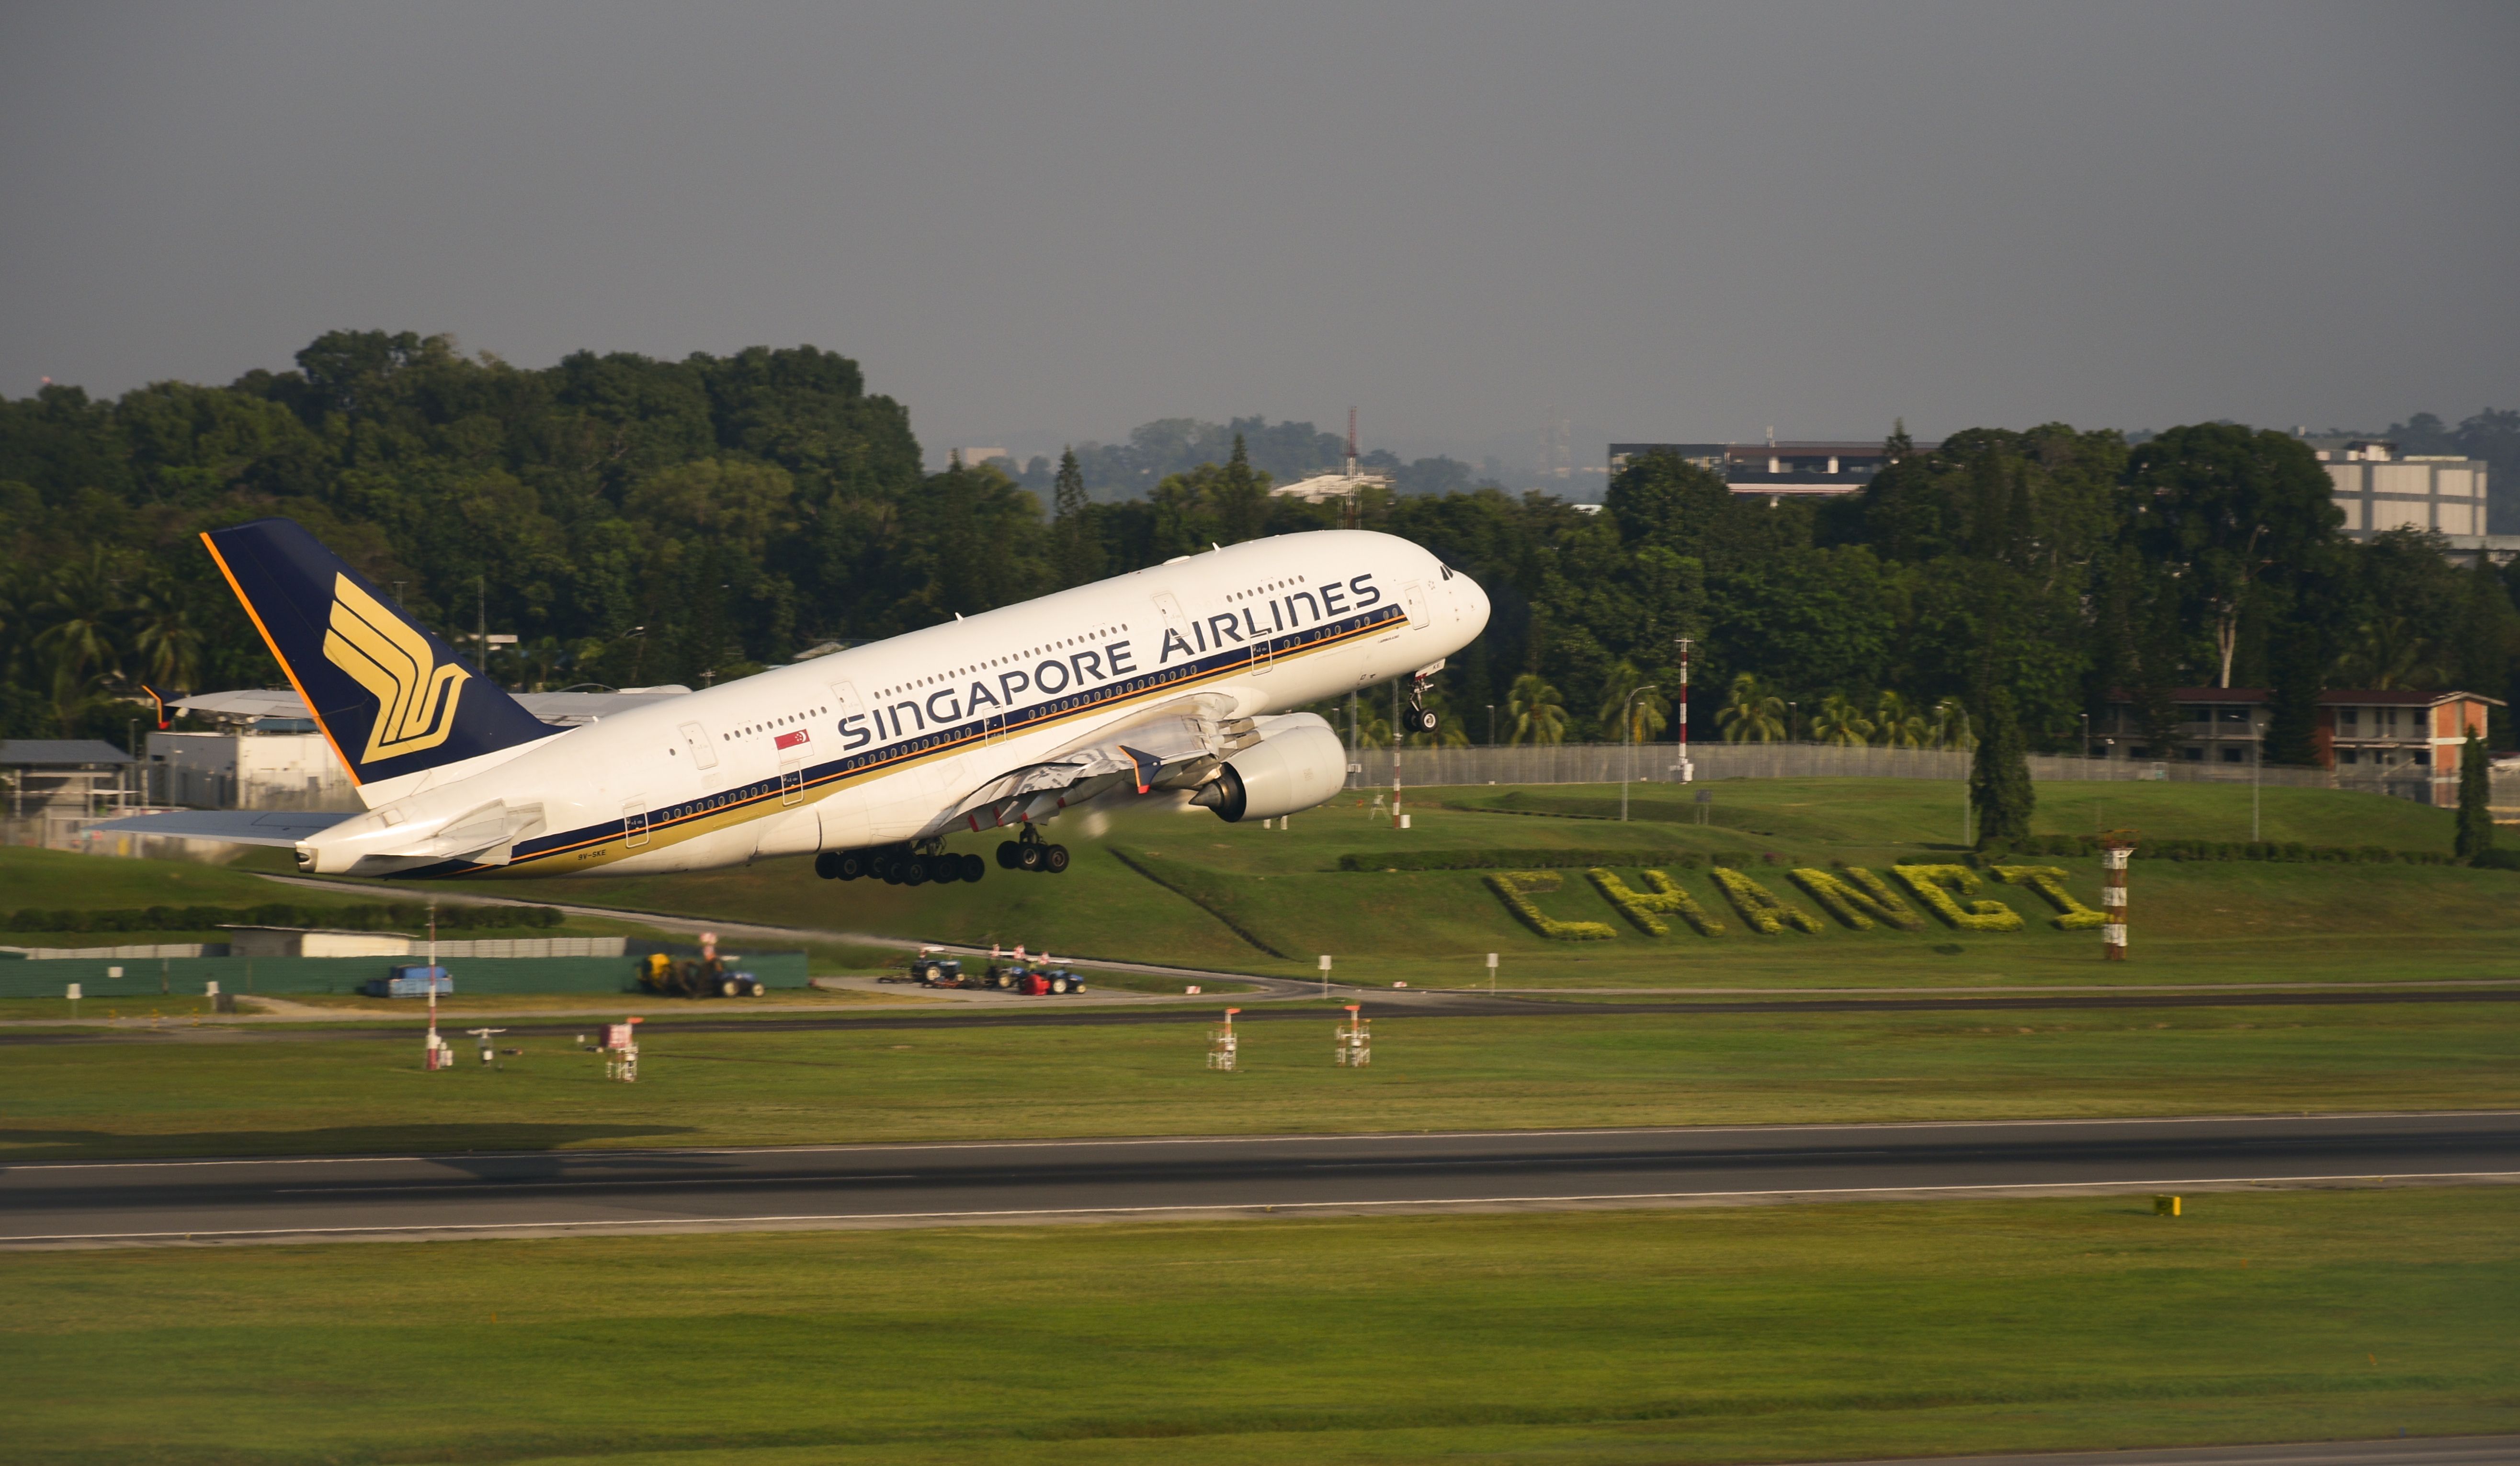 A Singapore Airlines Airbus A380 taking off from Changi International Airport